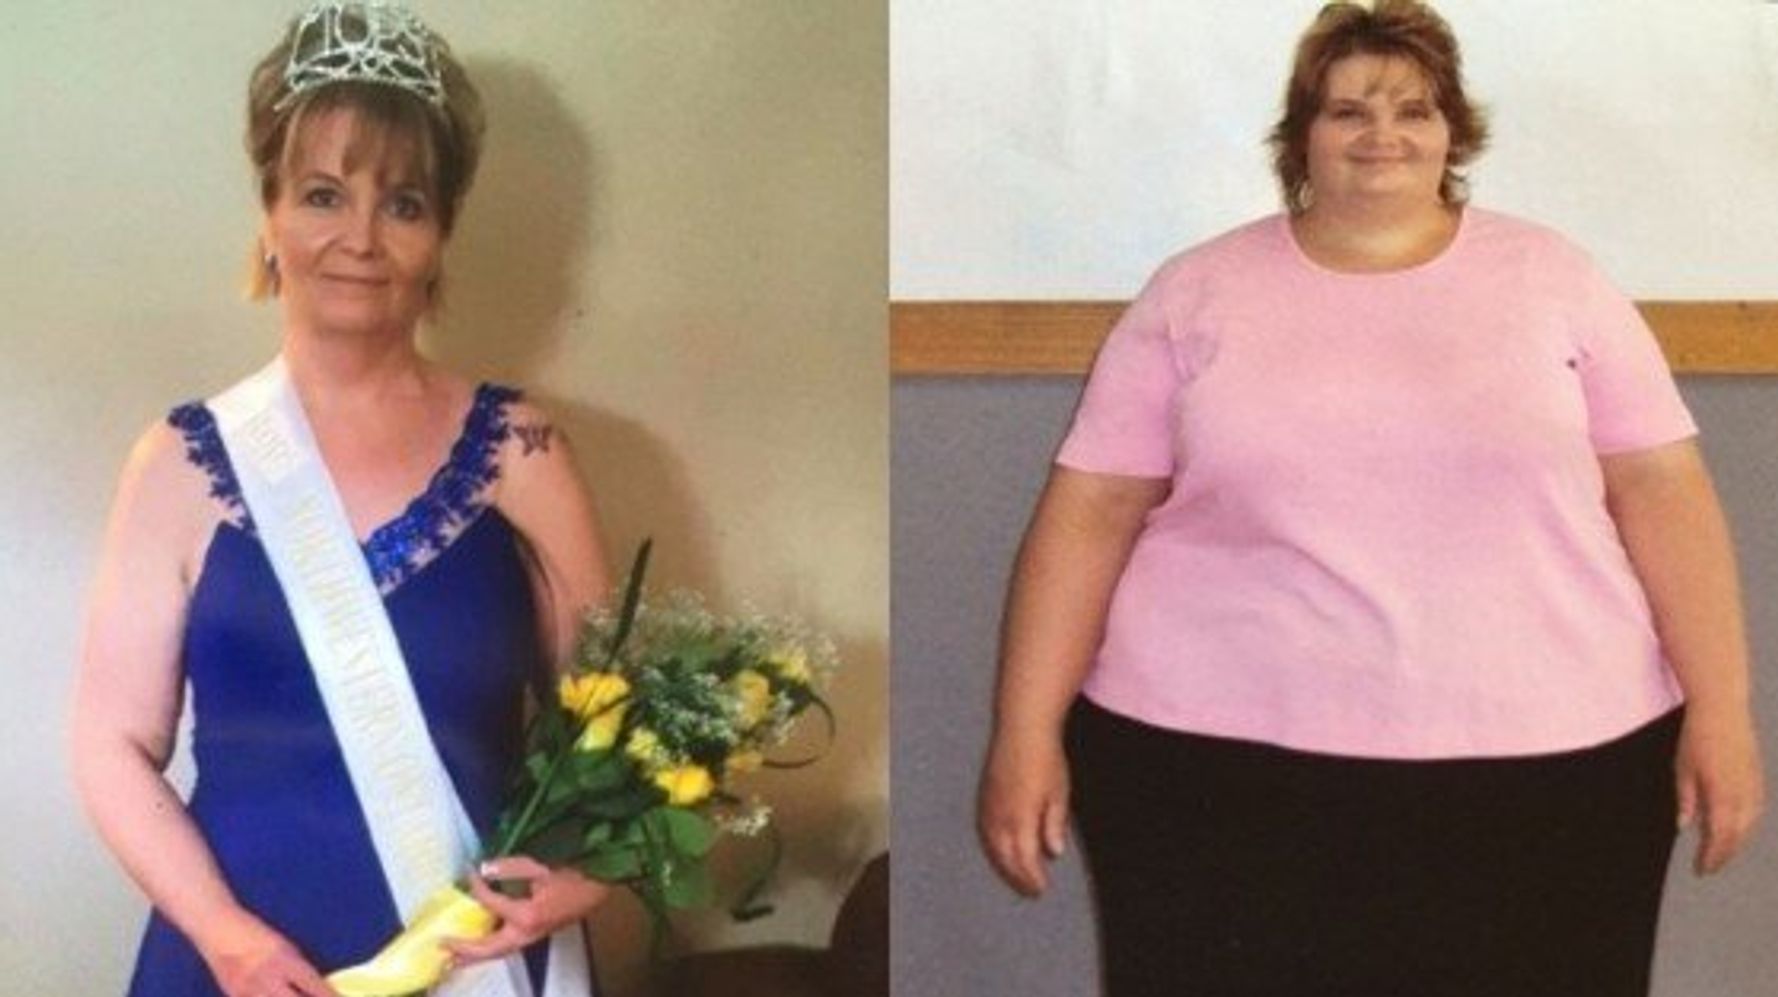 Long Term Weight Loss It Took 10 Years Of Focus For This Woman To Lose 190 Pounds Huffpost 